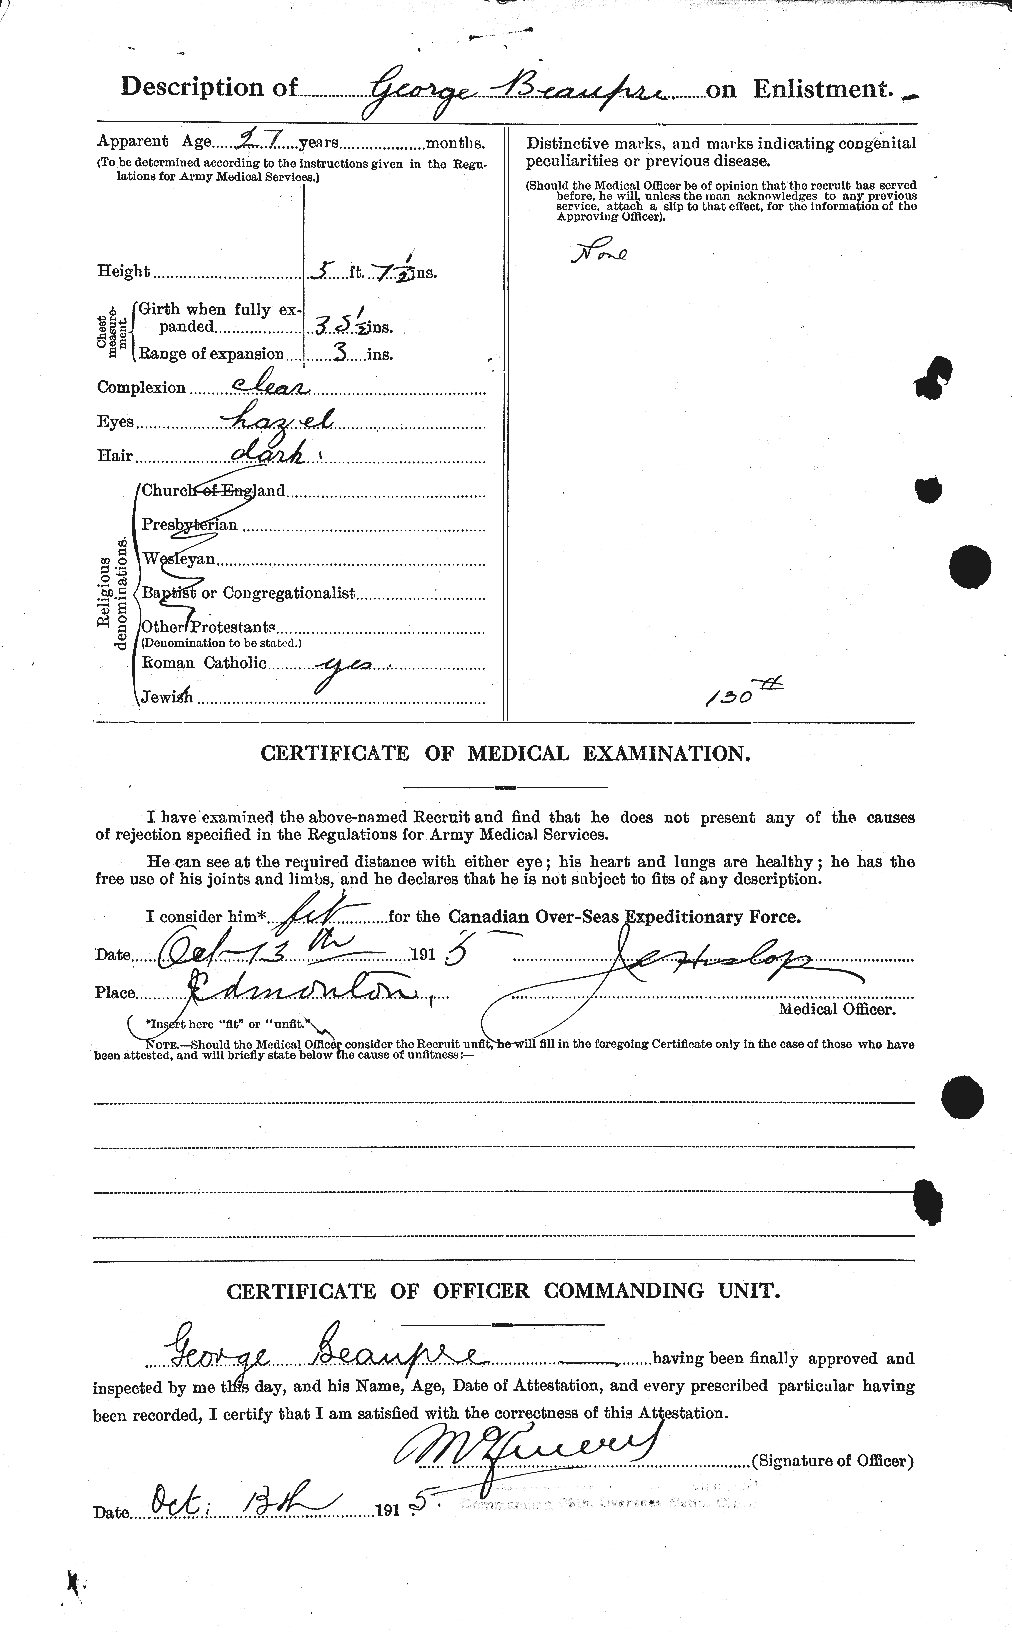 Personnel Records of the First World War - CEF 231749b